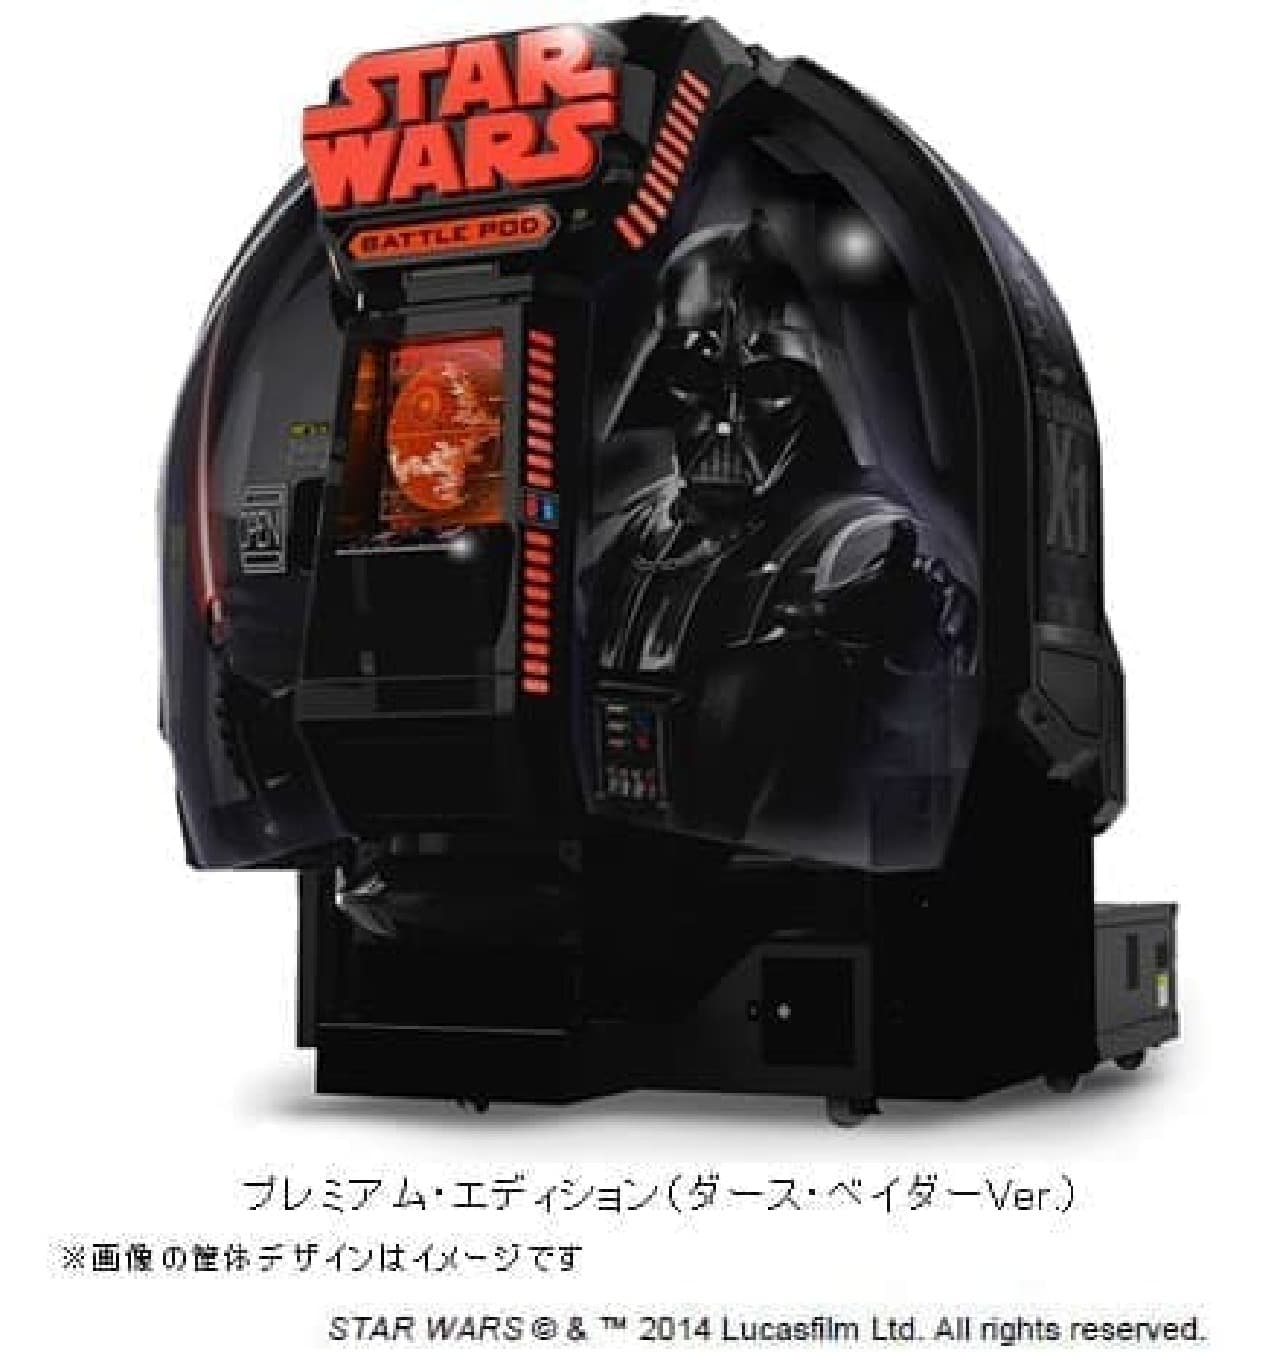 "Premium Edition (Darth Vader Ver.)" If you can buy it, I want to buy it!